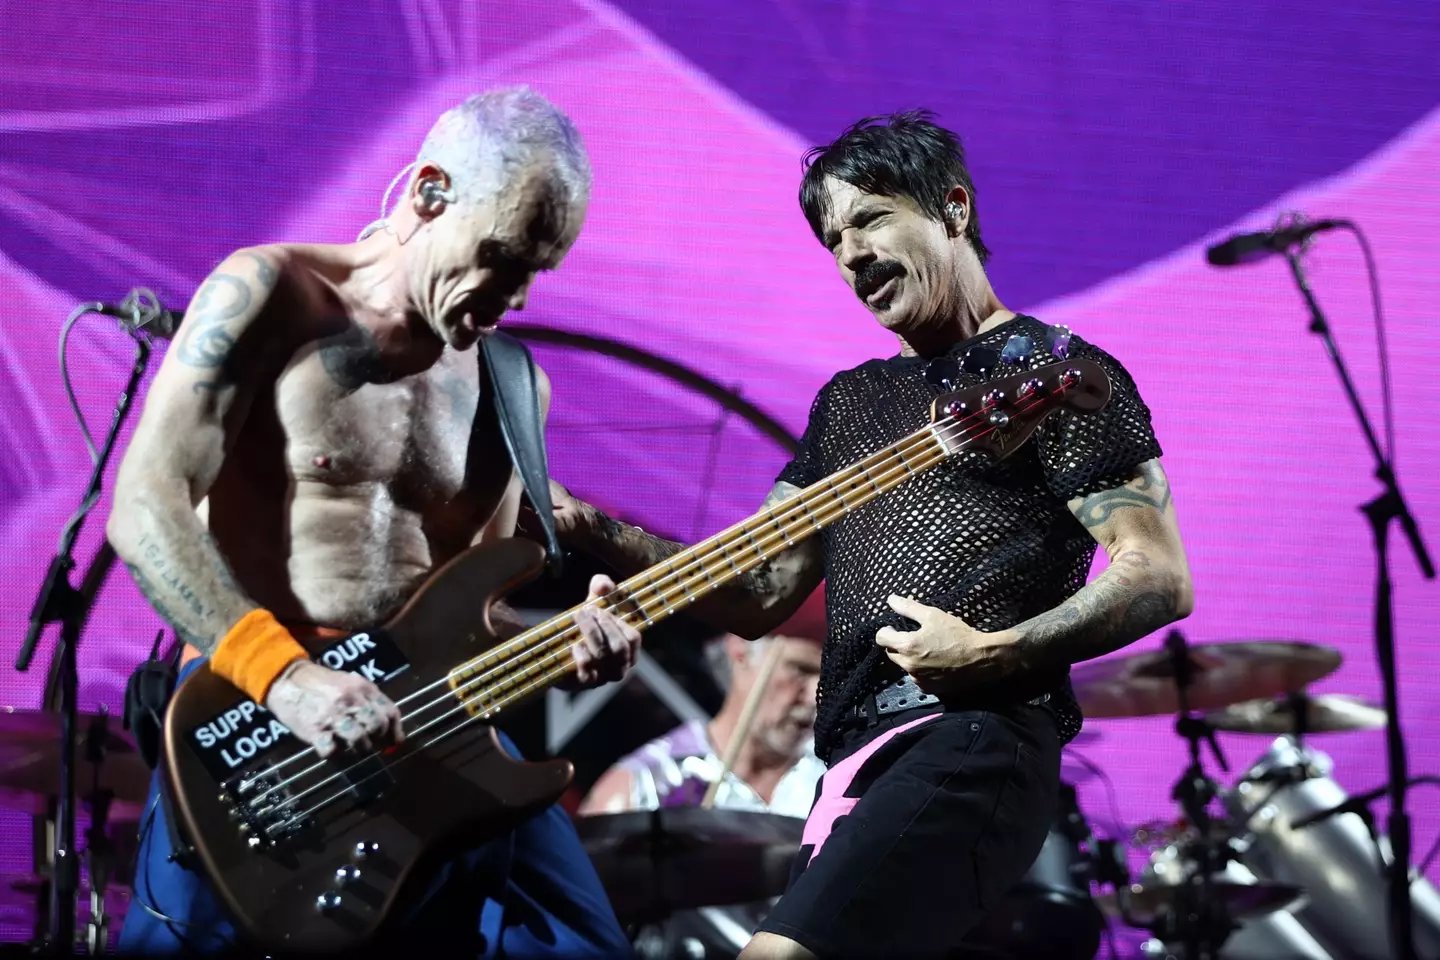 Some fans were disappointed with the band's set last year. (Don Arnold/WireImage)